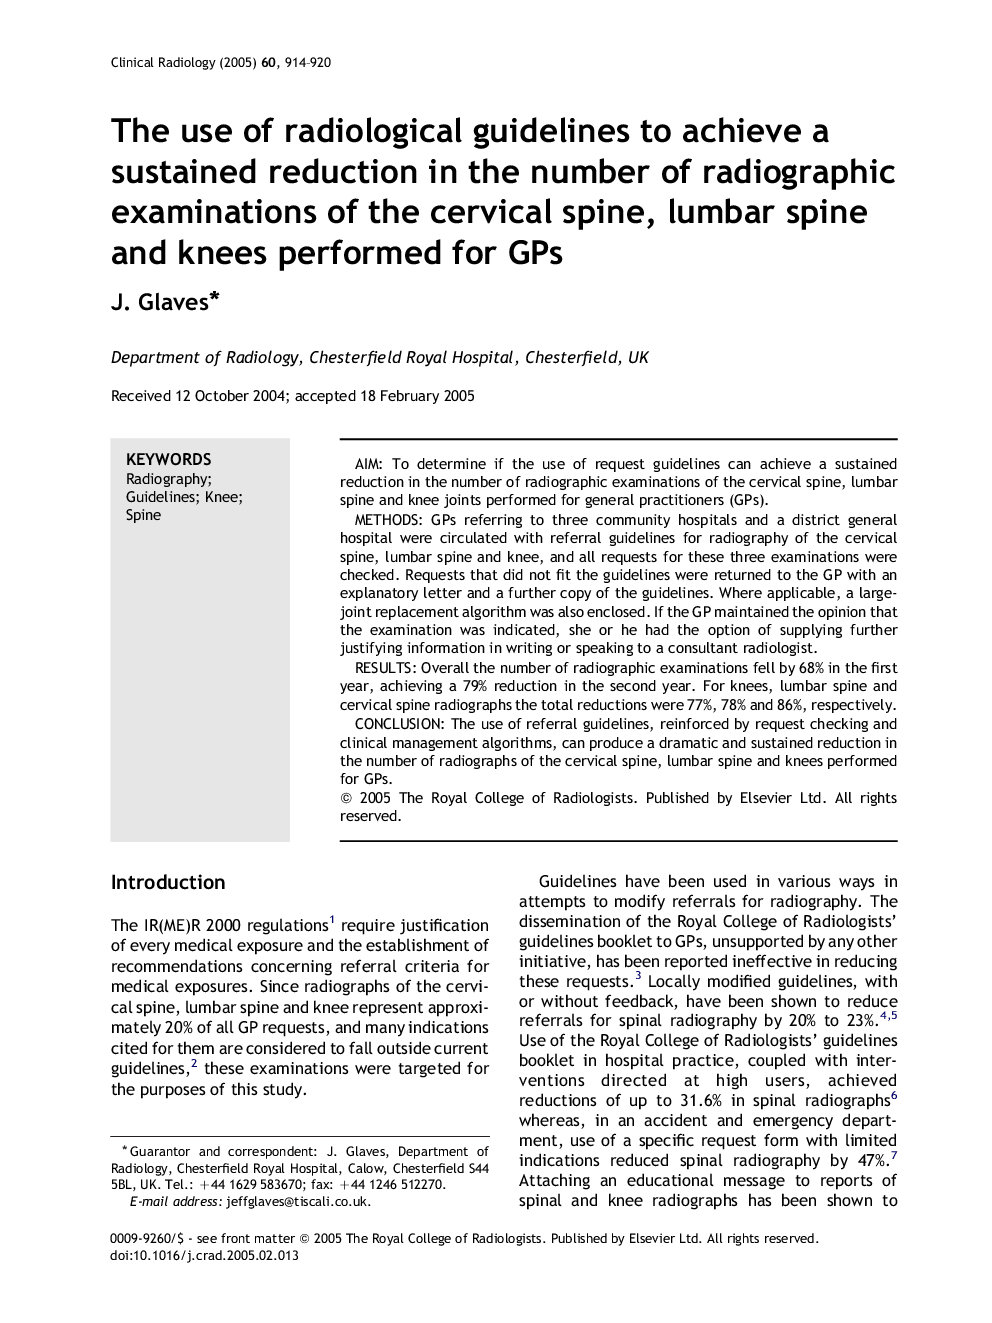 The use of radiological guidelines to achieve a sustained reduction in the number of radiographic examinations of the cervical spine, lumbar spine and knees performed for GPs